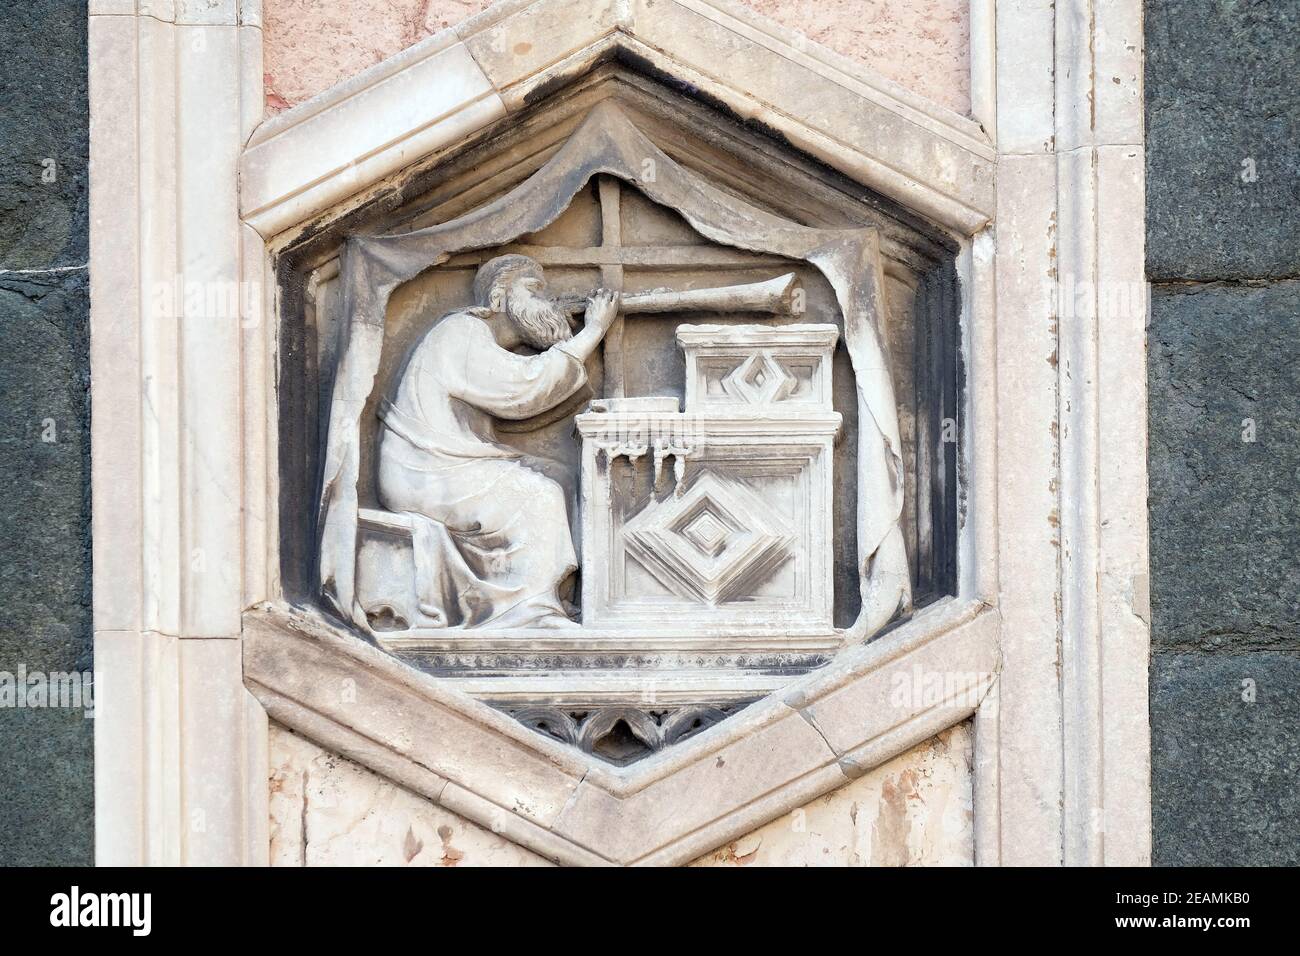 Jubal by Nino Pisano, 1334-36., Relief on Giotto Campanile of Cattedrale di Santa Maria del Fiore (Cathedral of Saint Mary of the Flower), Florence, Italy Stock Photo